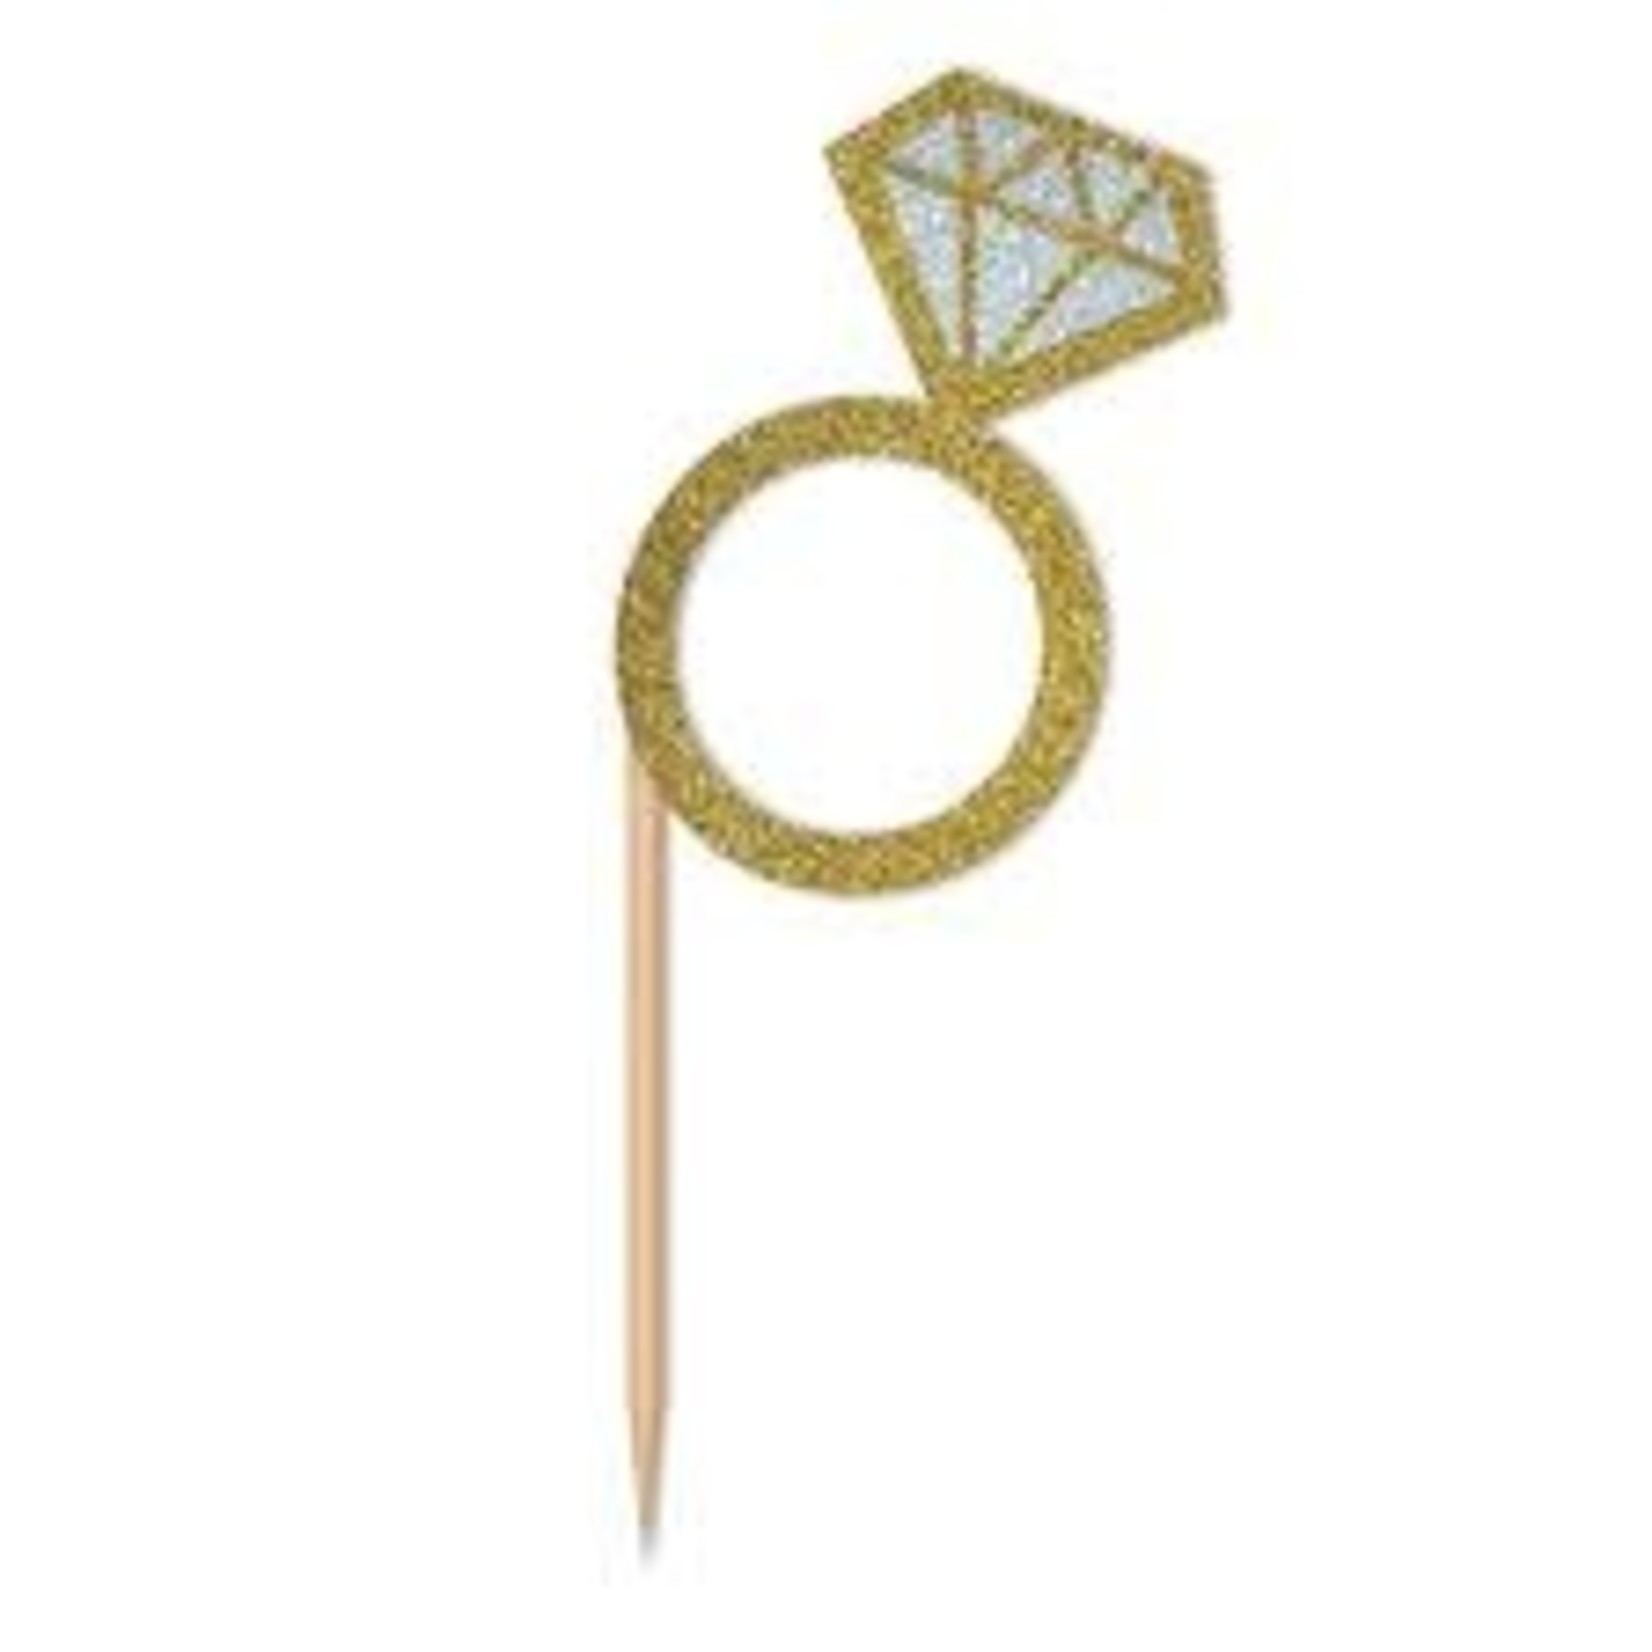 Beistle Diamond Ring Cake Toppers - 24ct.